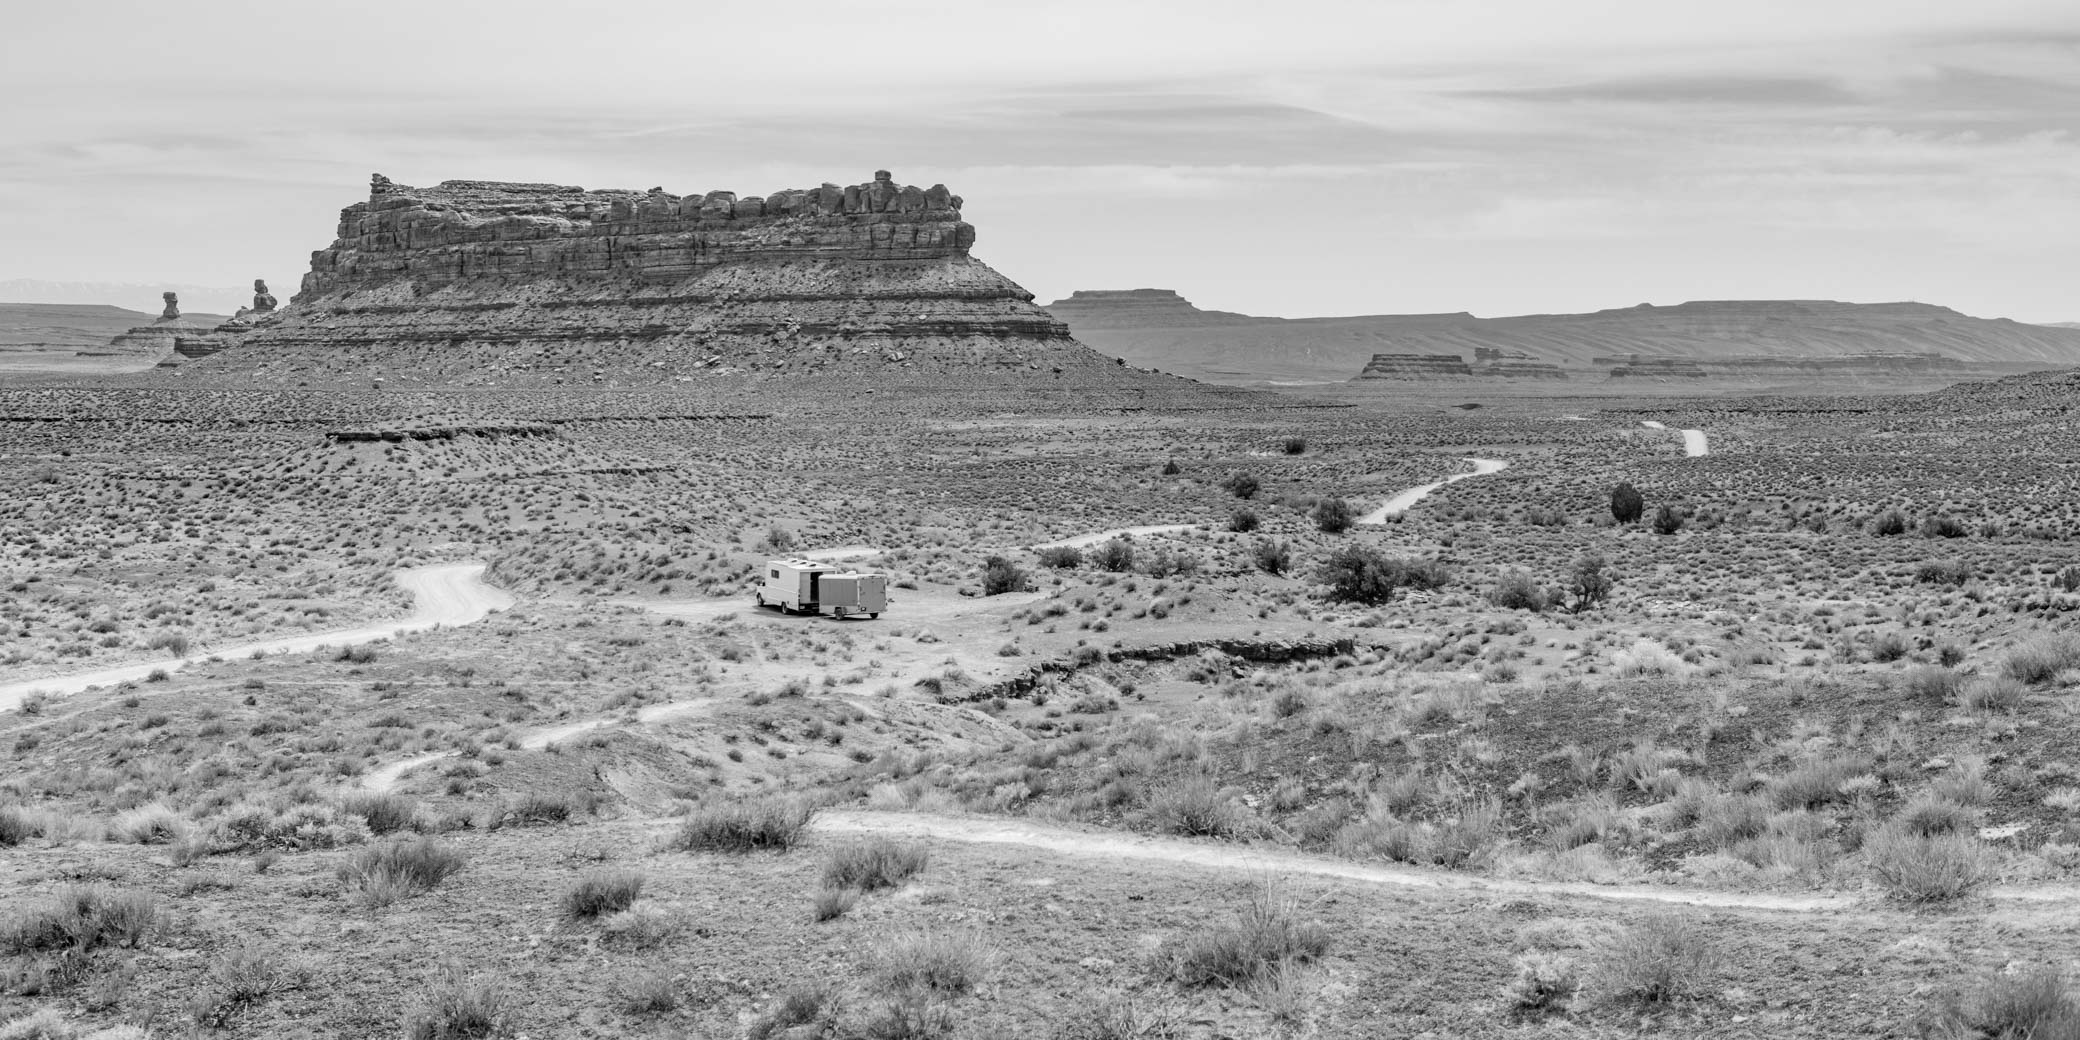 Camped at Valley of the Gods, Mexican Hat UT, April 14, 2022